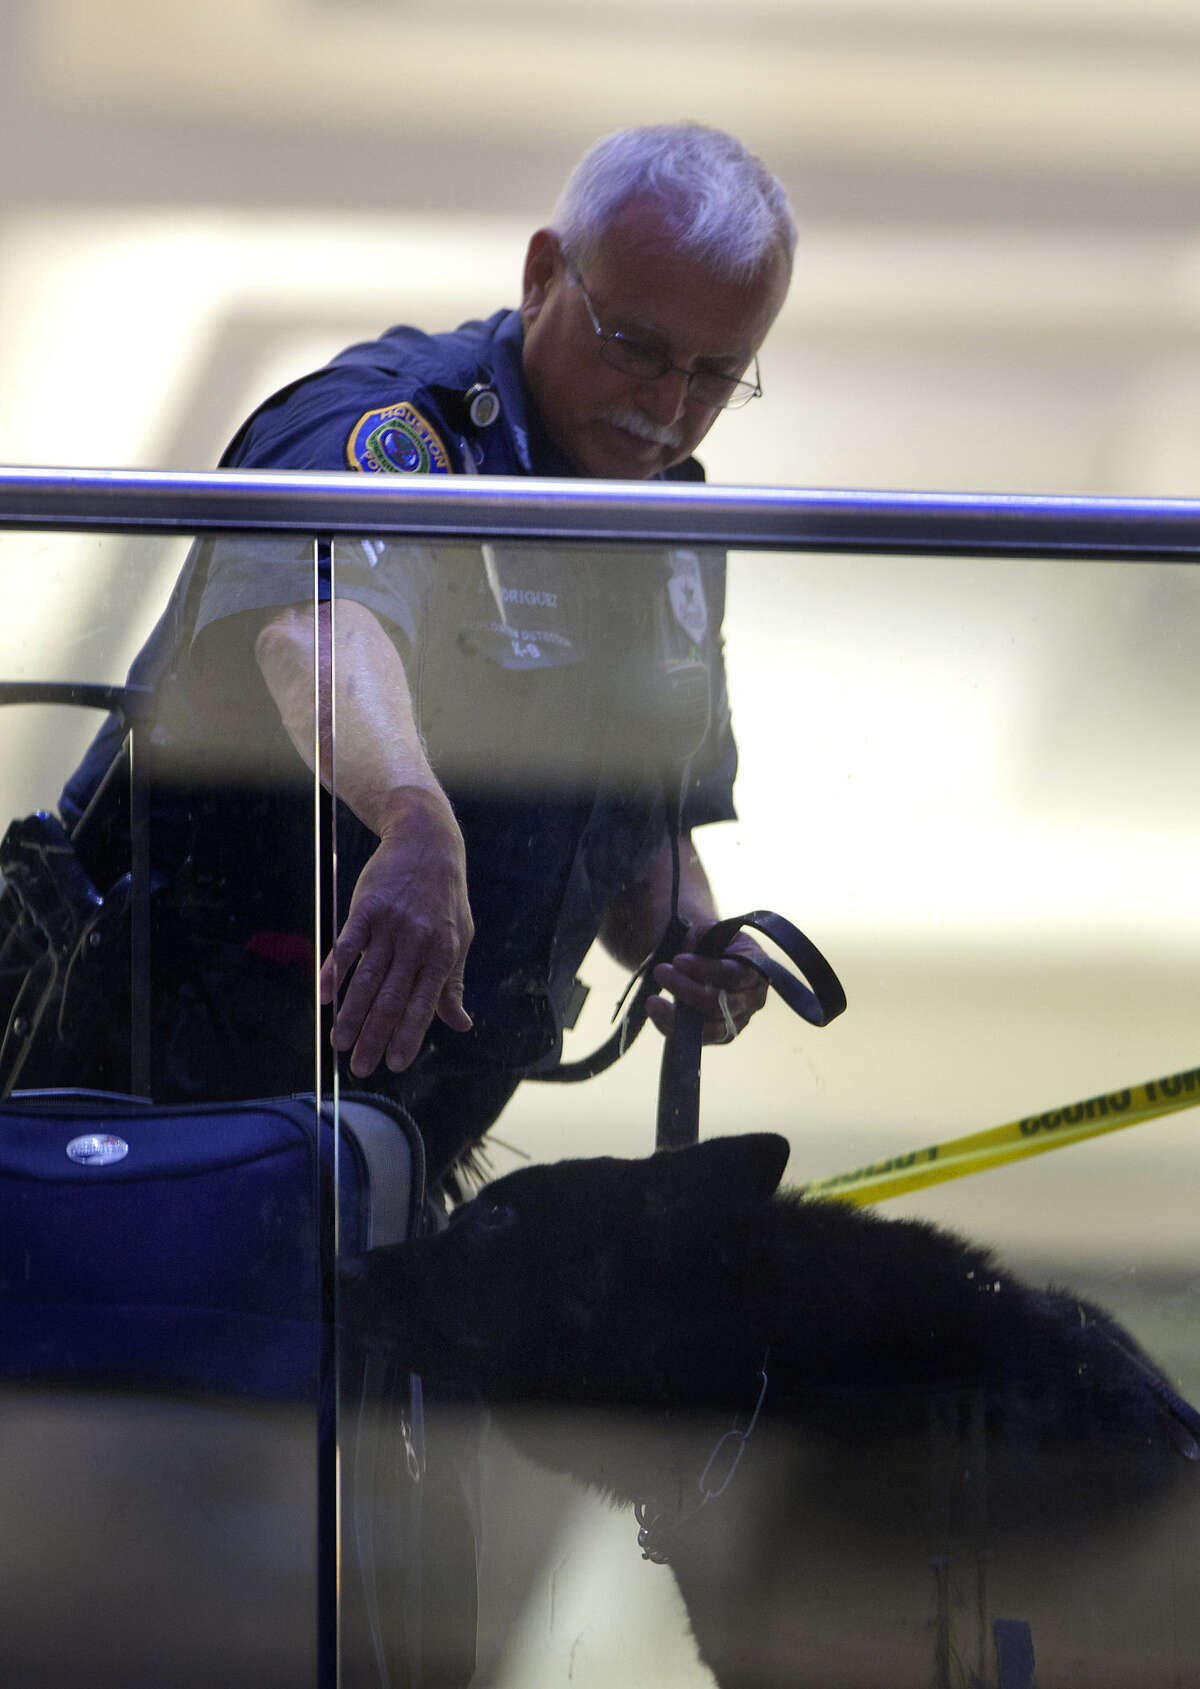 A police officer instructs a to dog to sniff luggage as they investigate the airport scene.